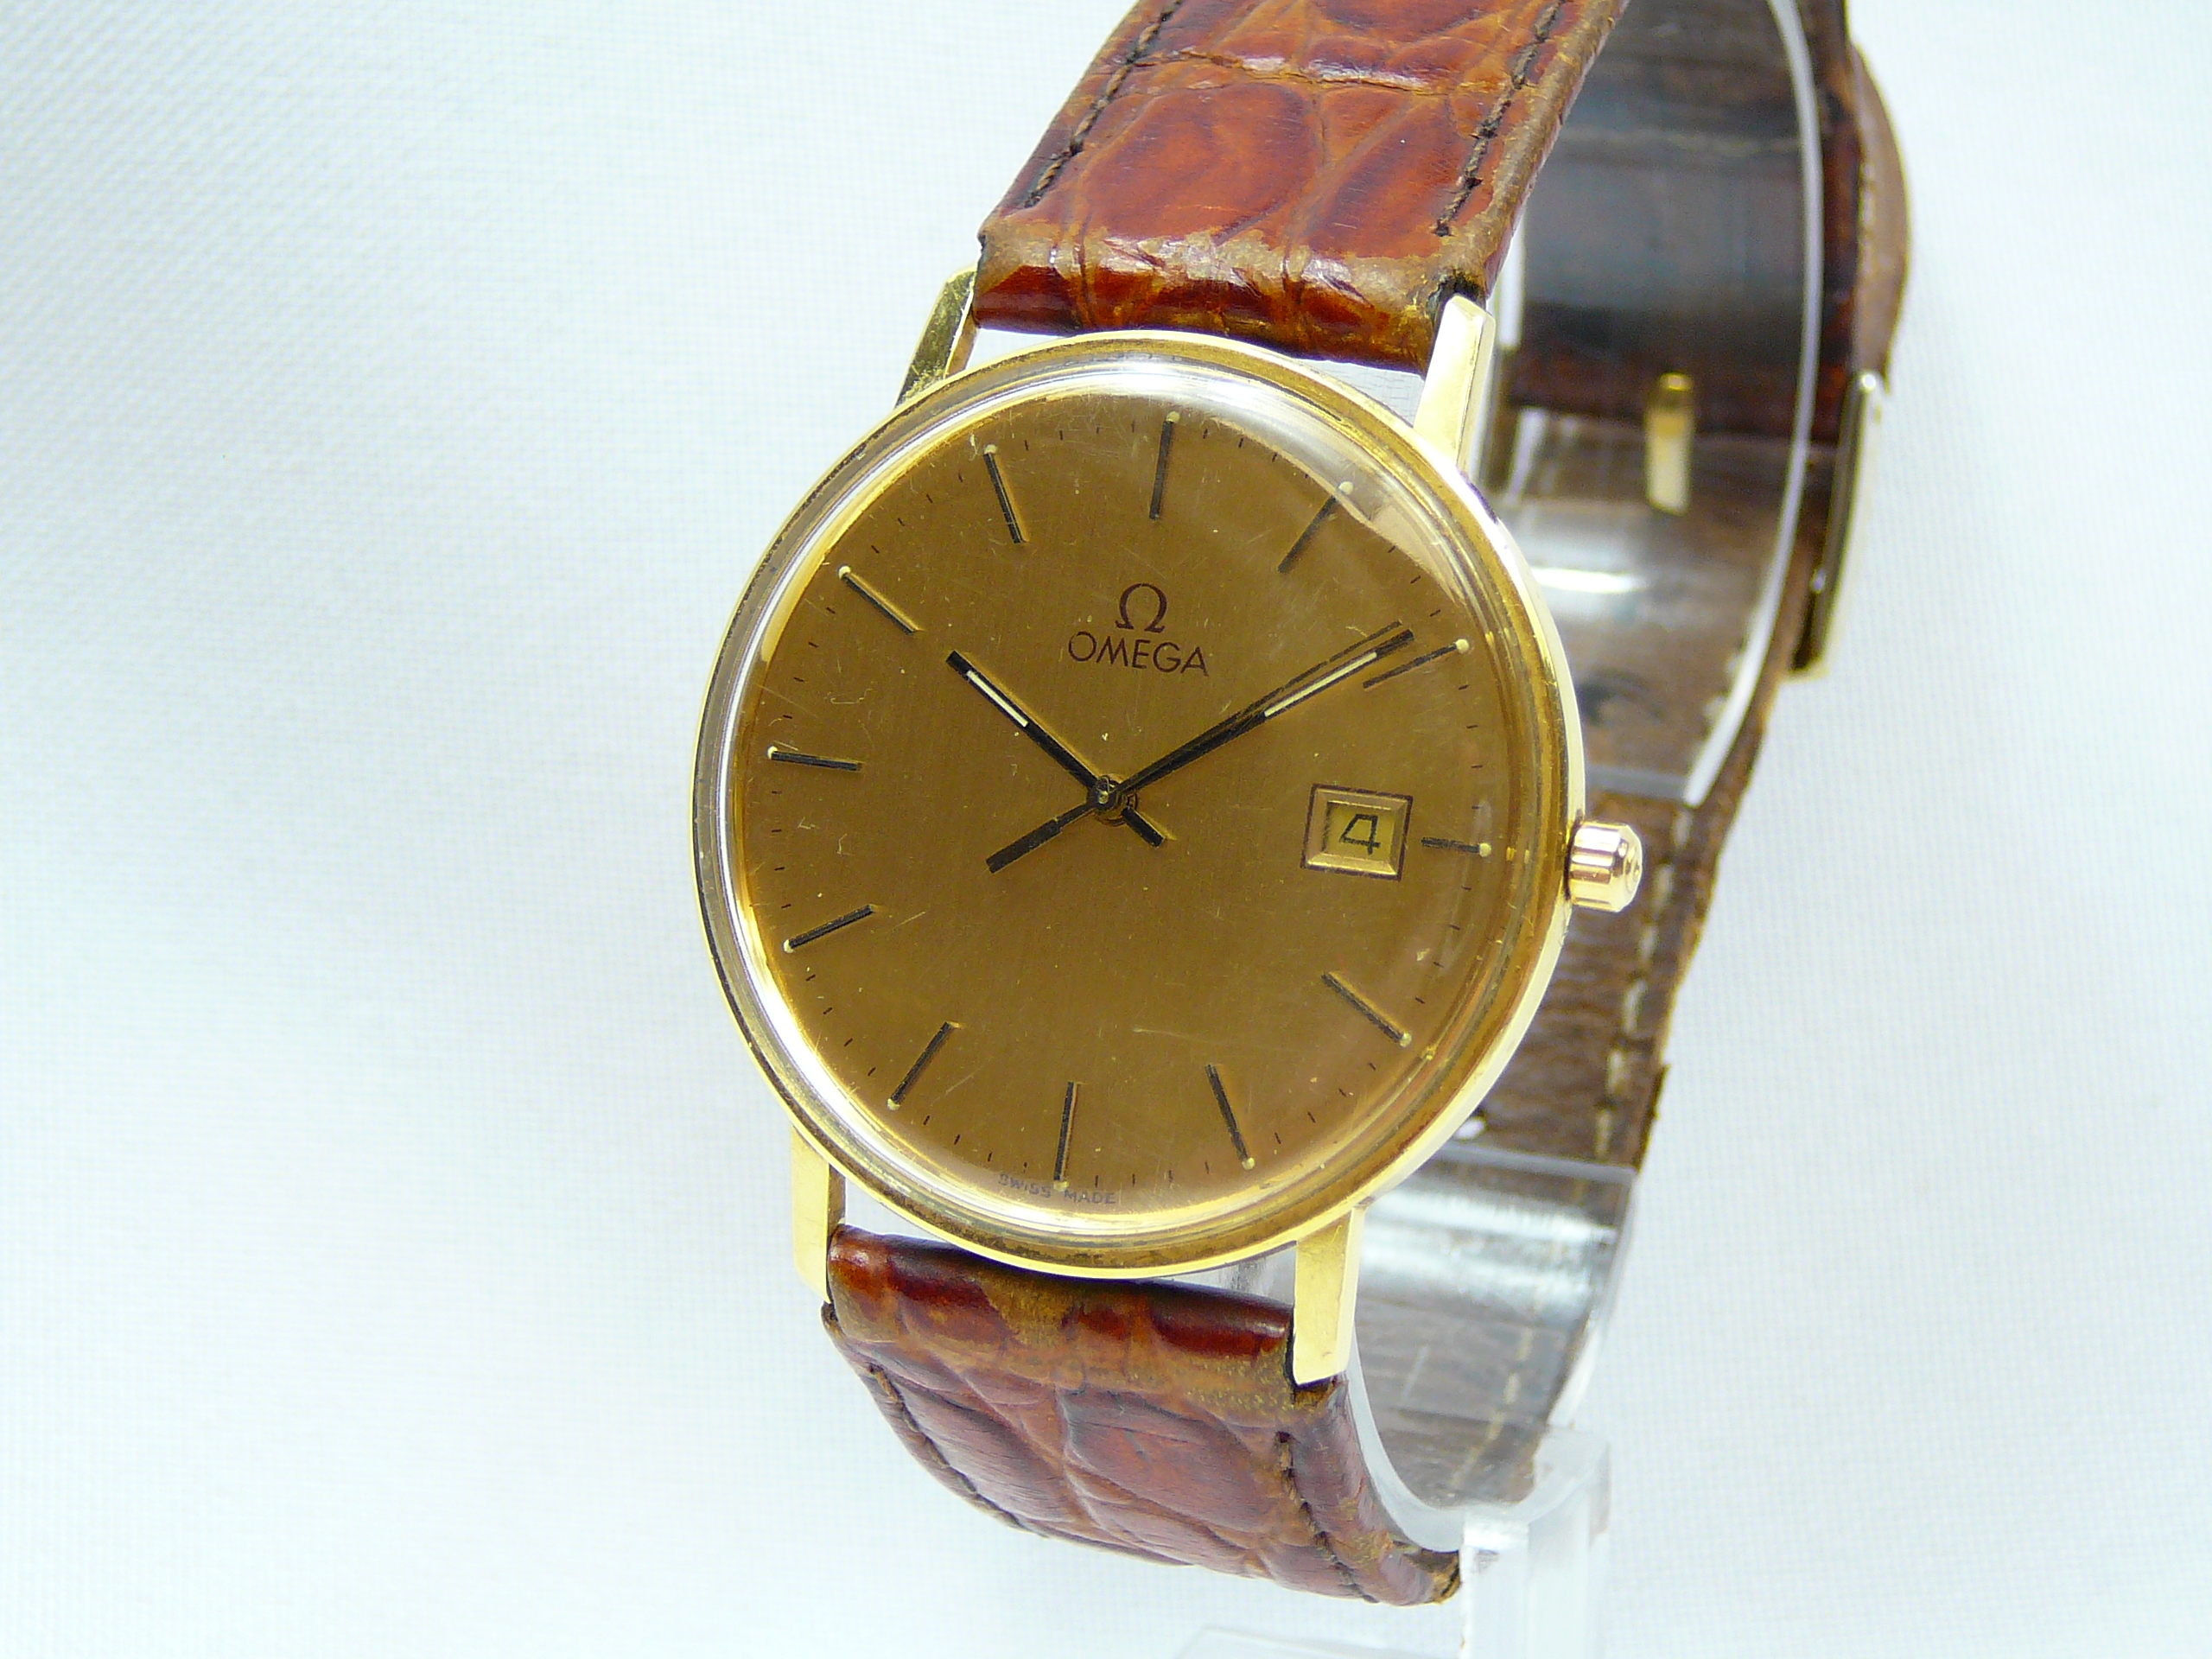 Gents gold Omega Wristwatch - Image 2 of 3